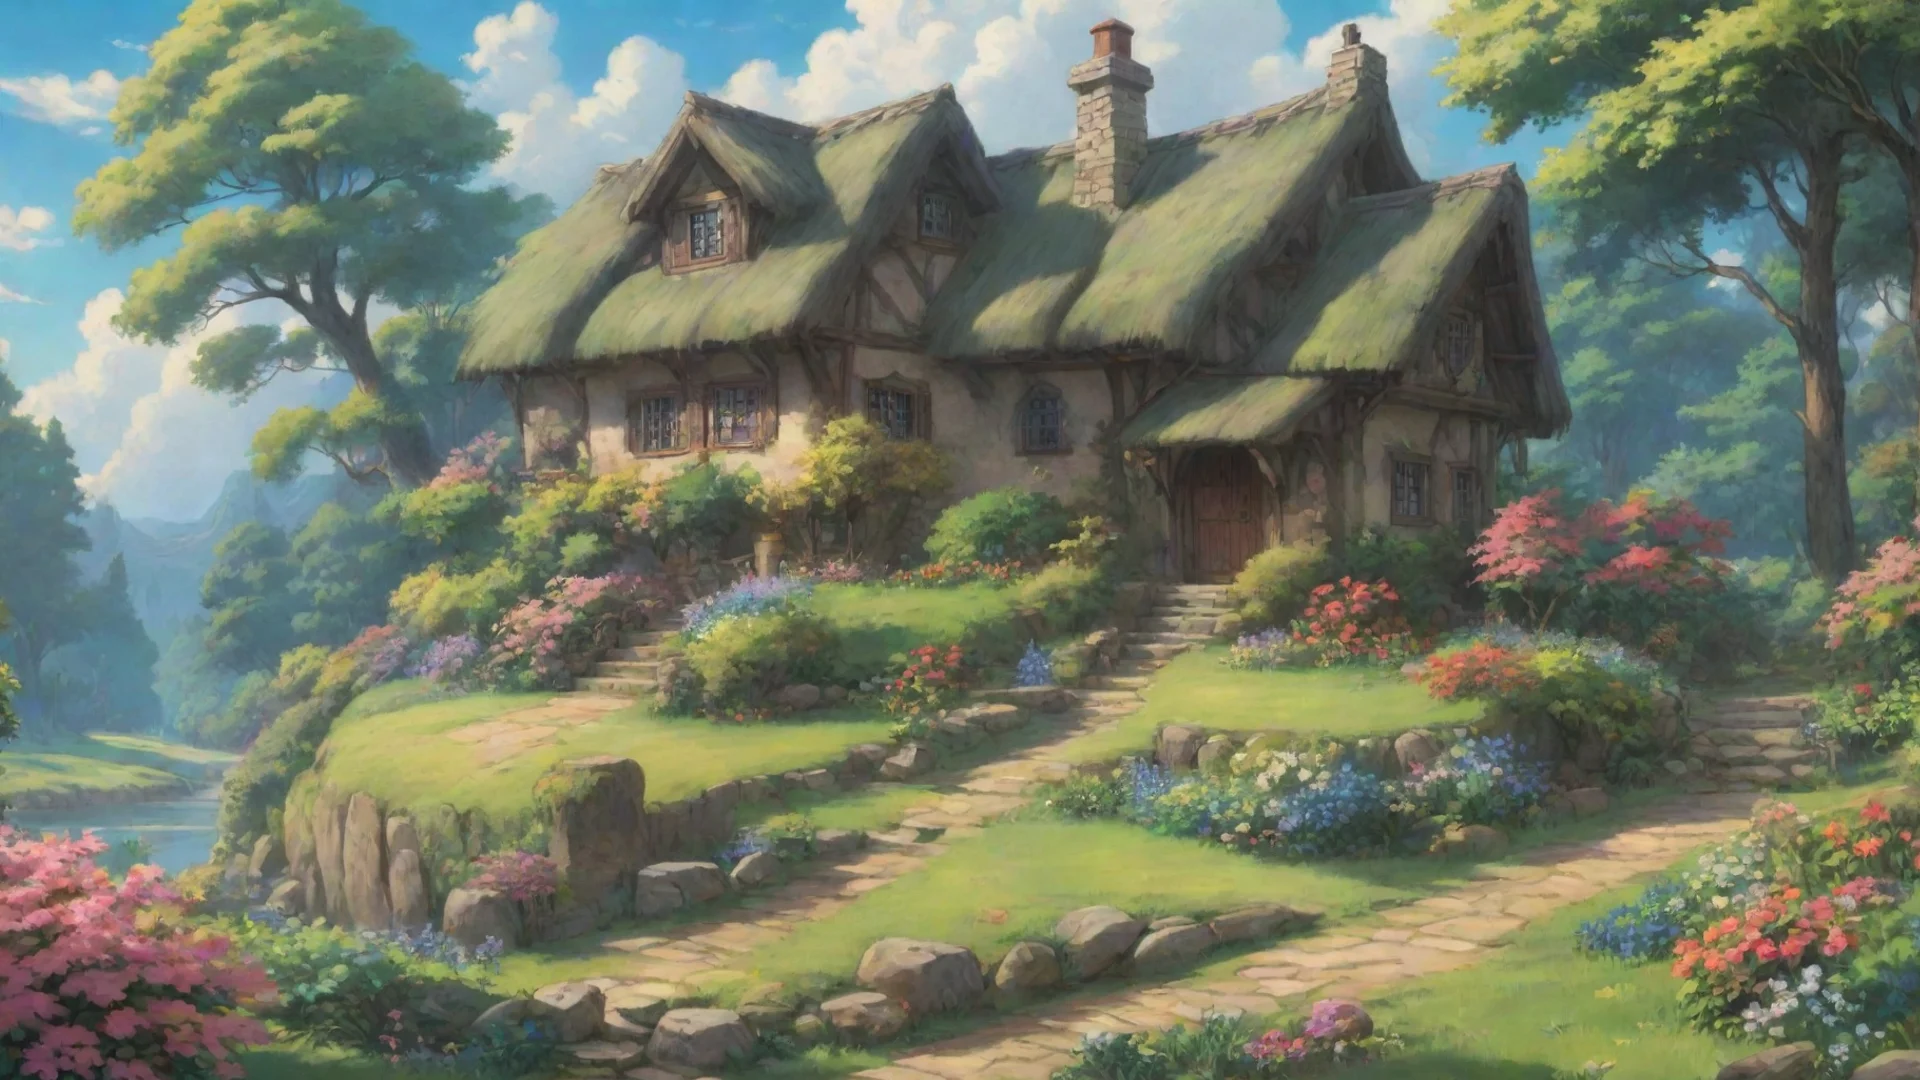 aiamazing epic landscape sweet cottage interesting plants anime hd ghibli awesome portrait 2 wide